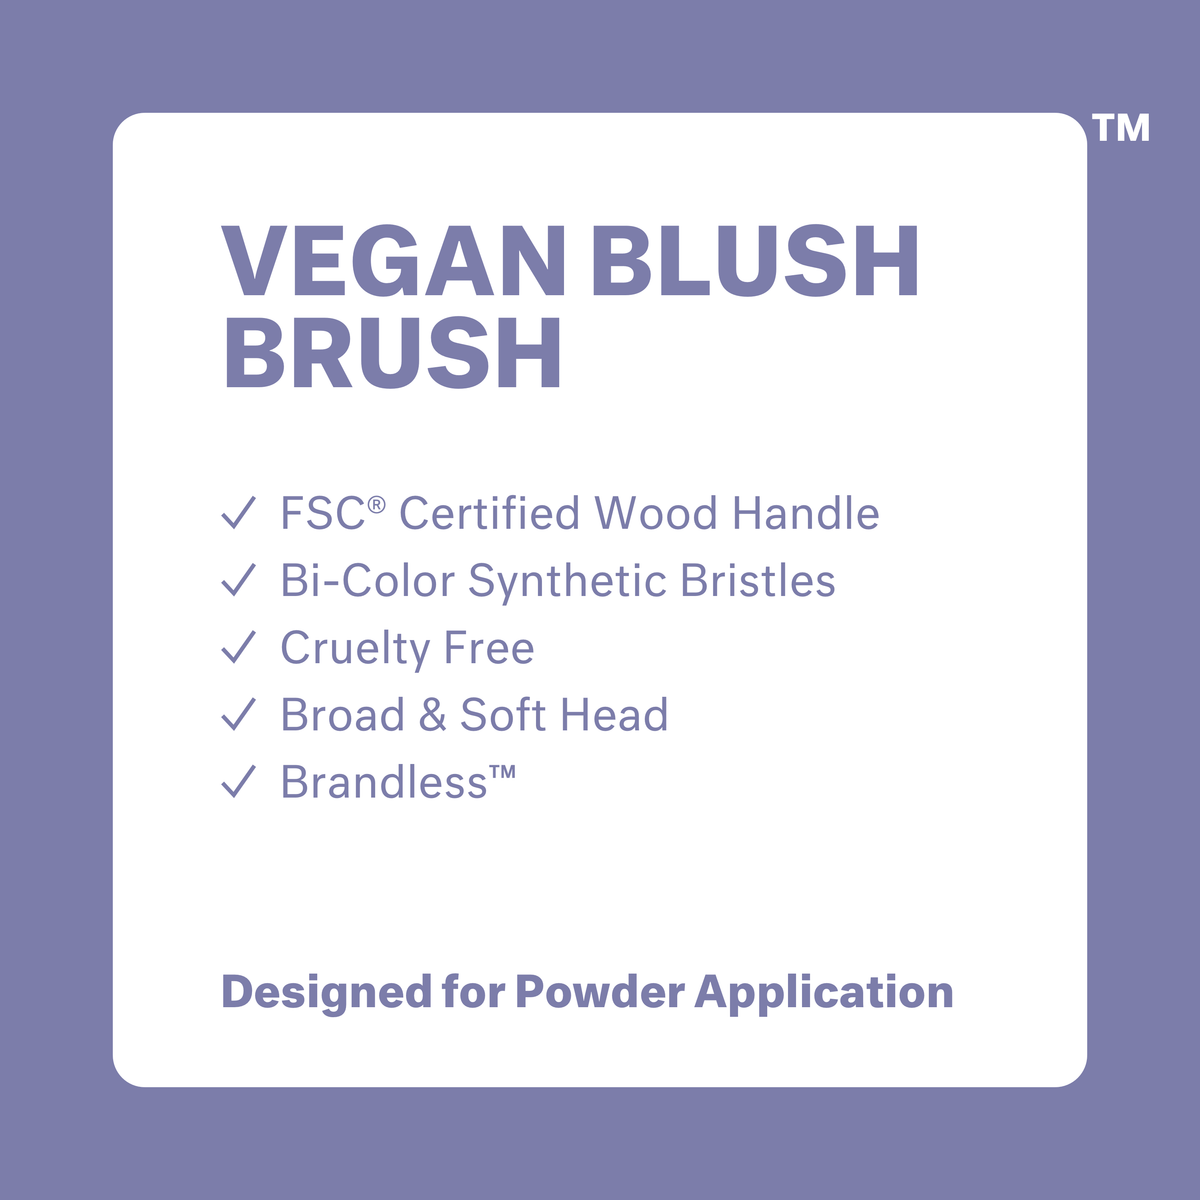 Vegan Blush Brush: FSC certified wood handle, bi-color synthetic bristles, cruelty free, broad and soft head, brandless. Designed for powder application.